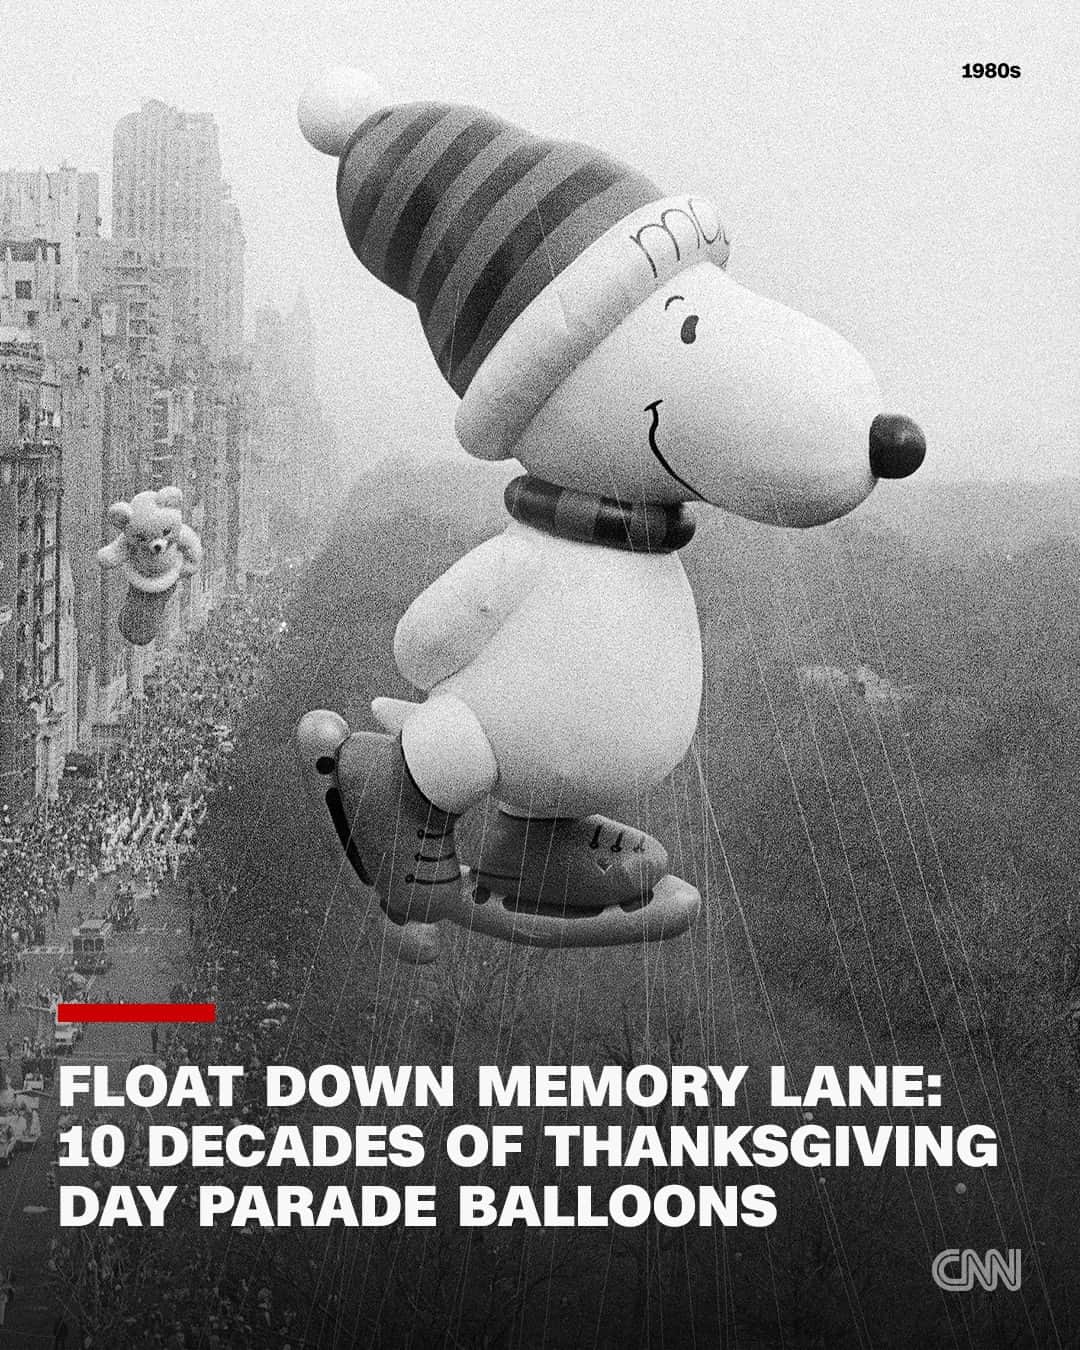 CNNのインスタグラム：「Now in its 99th year, the annual Macy's Thanksgiving Day Parade will soon bring together an unrivaled cast of balloon characters, along with floats, musical acts and spectators of all ages along New York City's streets.  Originally dubbed the Macy's Christmas Parade, the first event took off on November 24, 1924, in front of a crowd of 10,000. In 1927, Macy's changed its name to the Thanksgiving Day Parade, debuting balloons that same year. Parade onlookers hit the 1 million mark in the 1930s – while more recently, 3.5 million people have lined the streets to watch. The elements have thrown some challenges through the years, with rainy hiccups, blustery days and some snow, but the parade marches on.  Tap the link in our bio to explore more parade balloons through the years, and see how the New York landscape has changed alongside this beloved American holiday event.  📸: Sara Krulwich/The New York Times/Redux | AP | Bettmann Archive/Getty Images | John Phillips/The LIFE Picture Collection/Shutterstock | Bettmann Archive/Getty Images | Courtesy Macy's | Ira Berger/Alamy Stock Photo | Hiroji Kubota/Magnum | Joe Kohen/Getty Images | Carlo Allegri/Reuters」